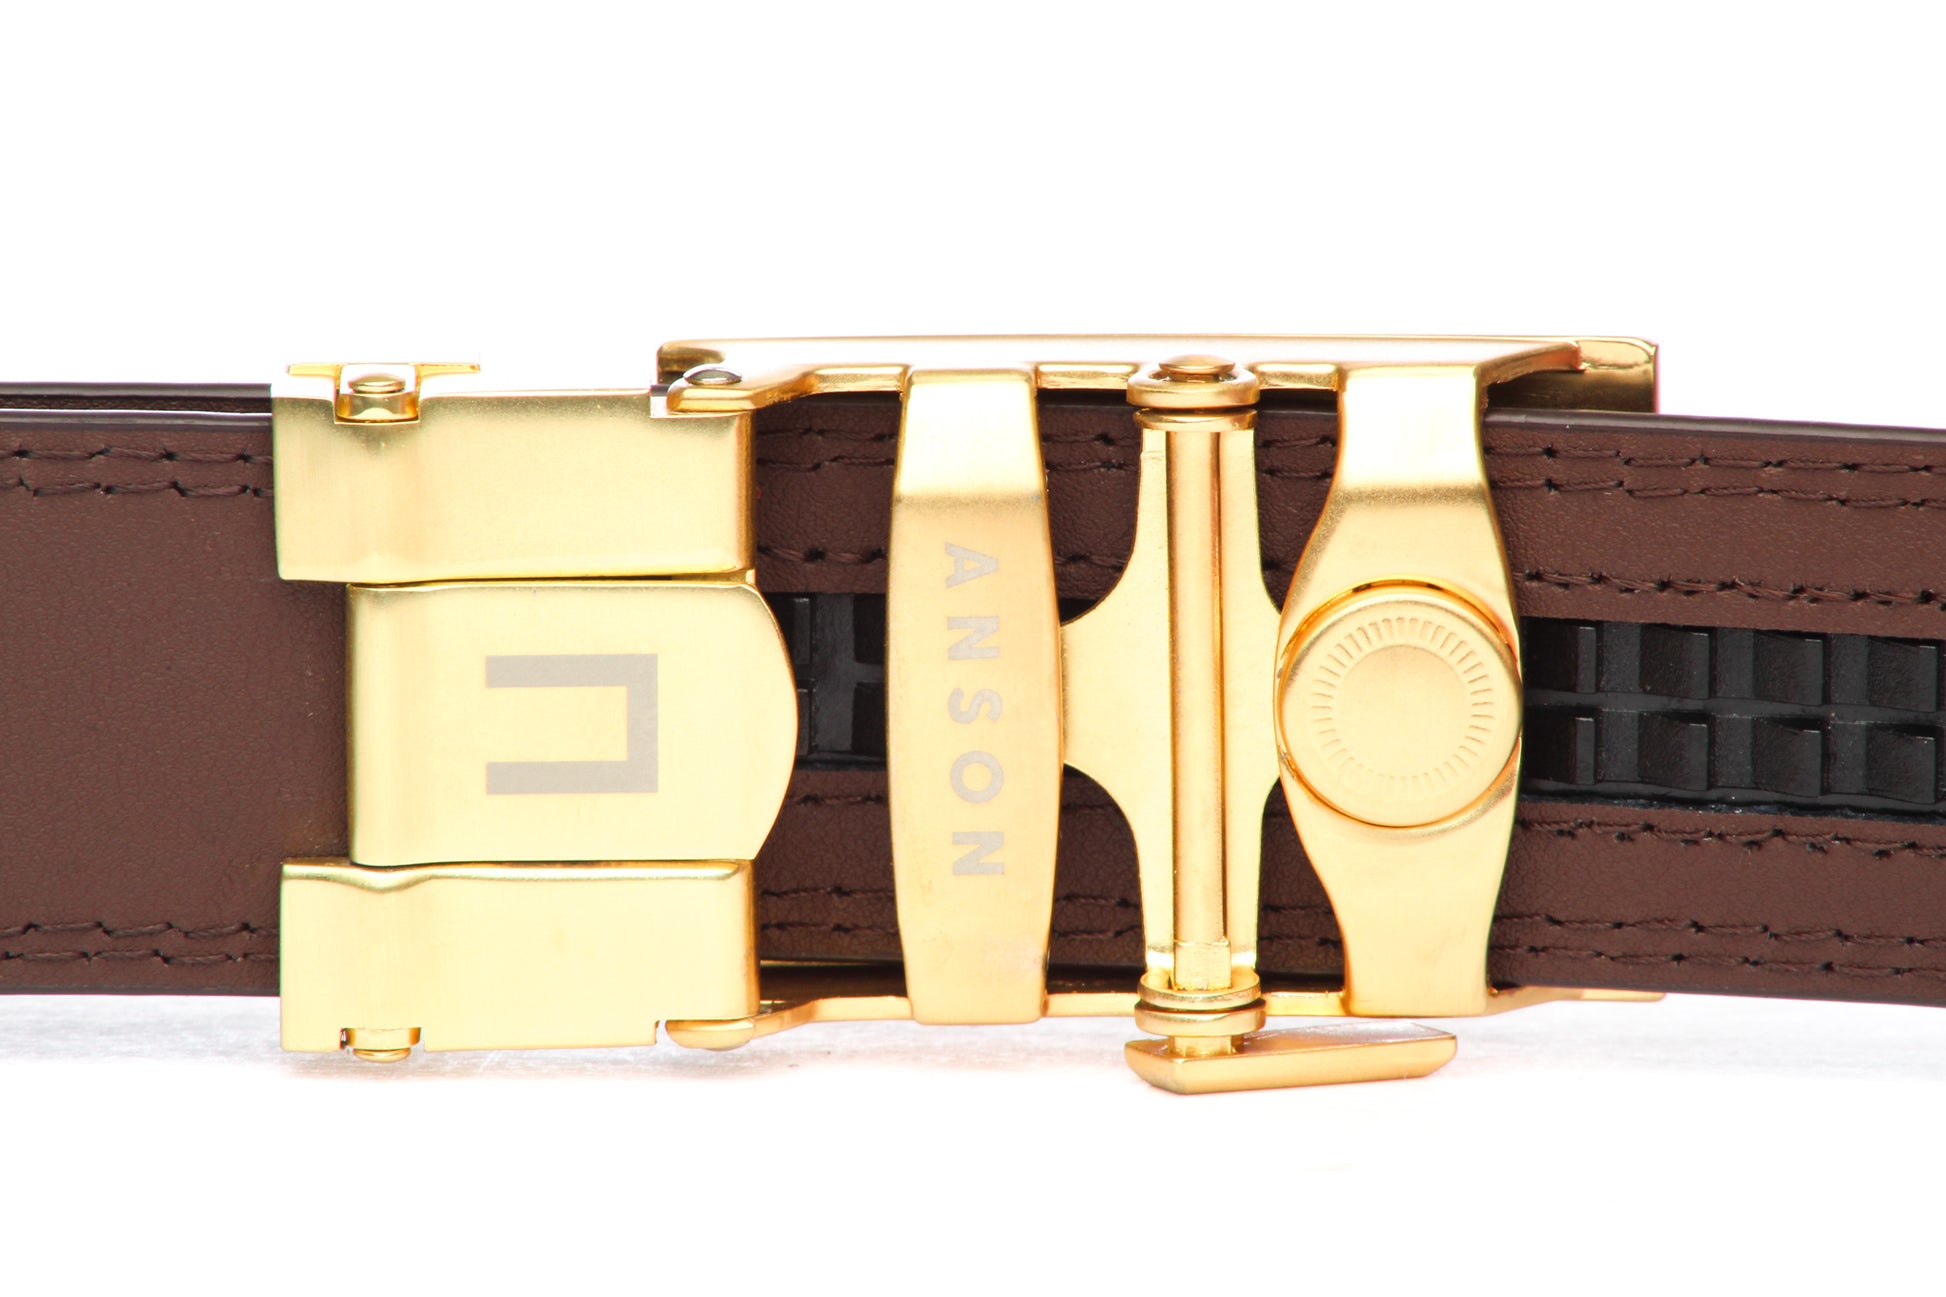 Men's golf ratchet belt buckle in gold with a 1.25-inch width, back view.